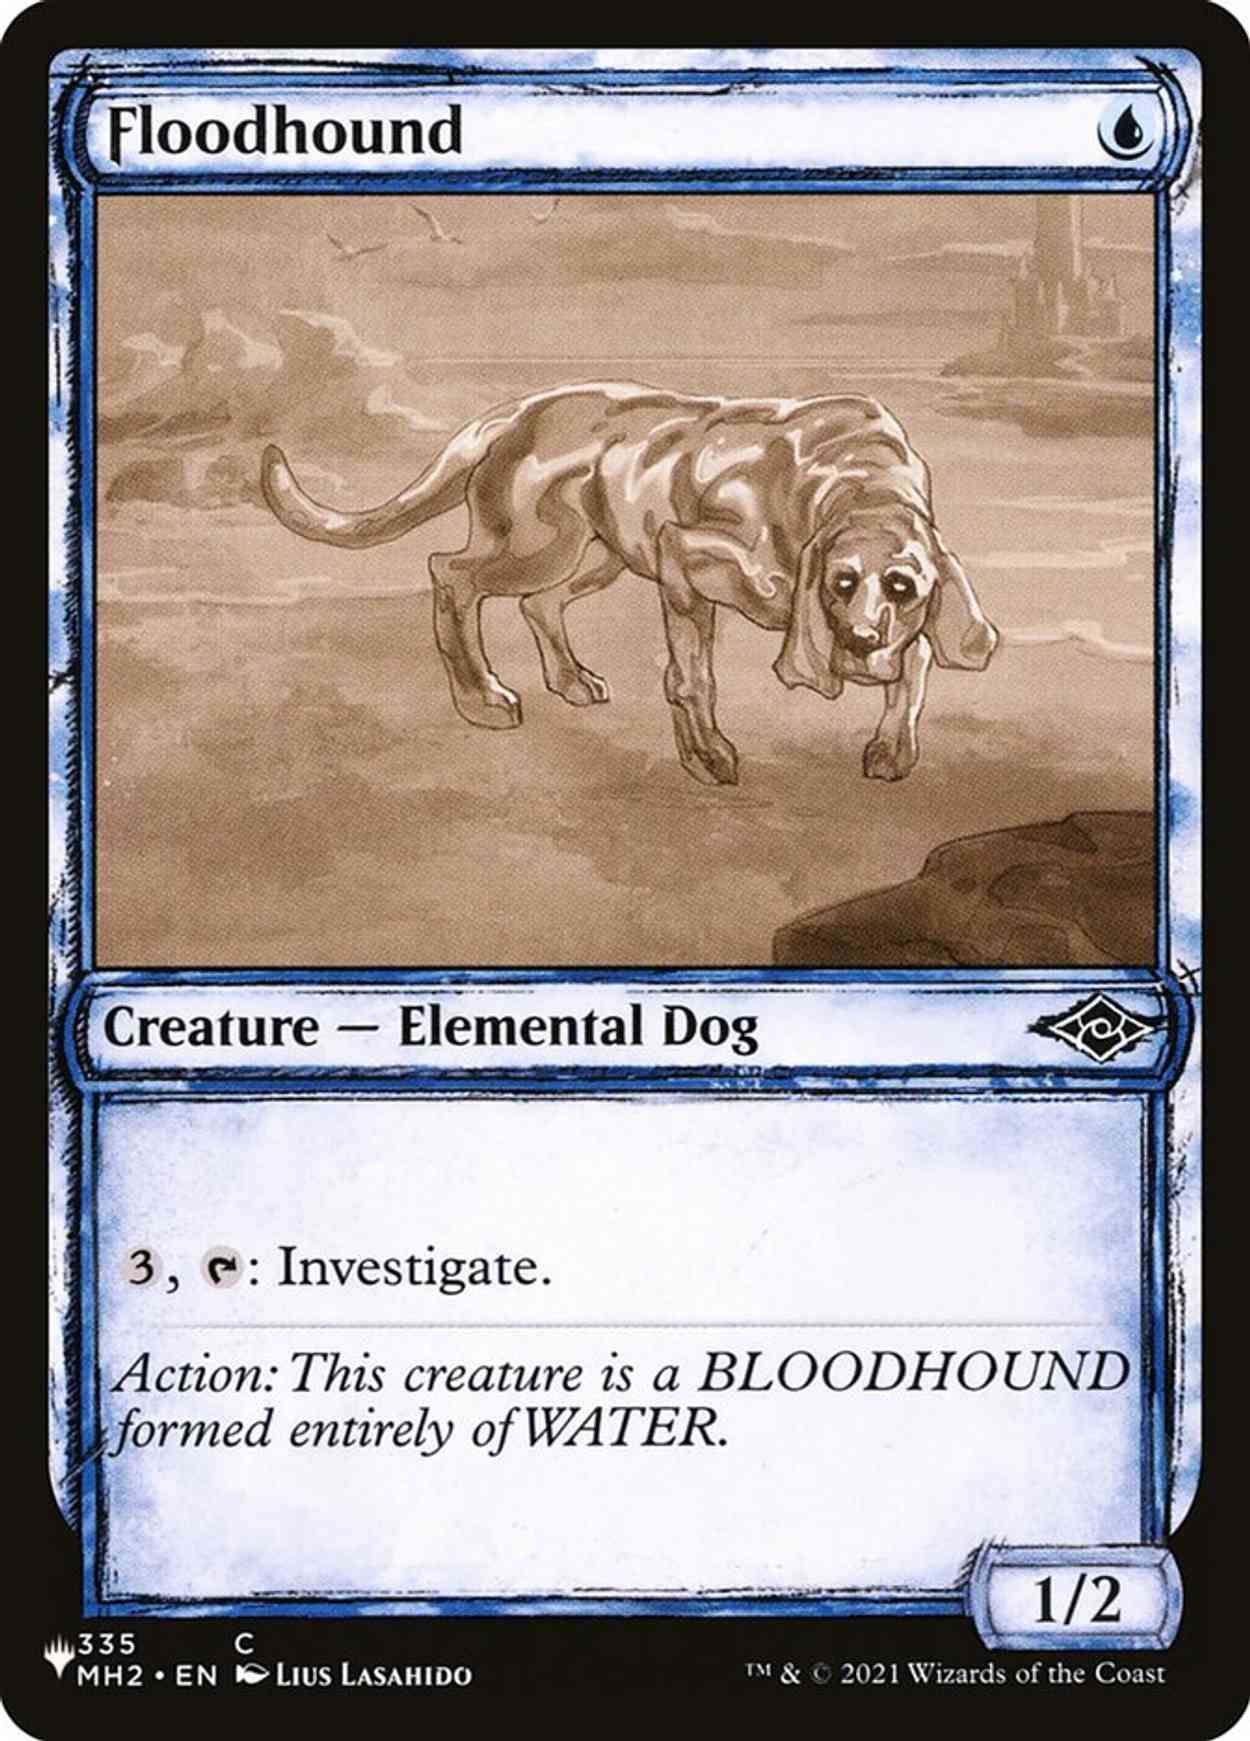 Floodhound magic card front